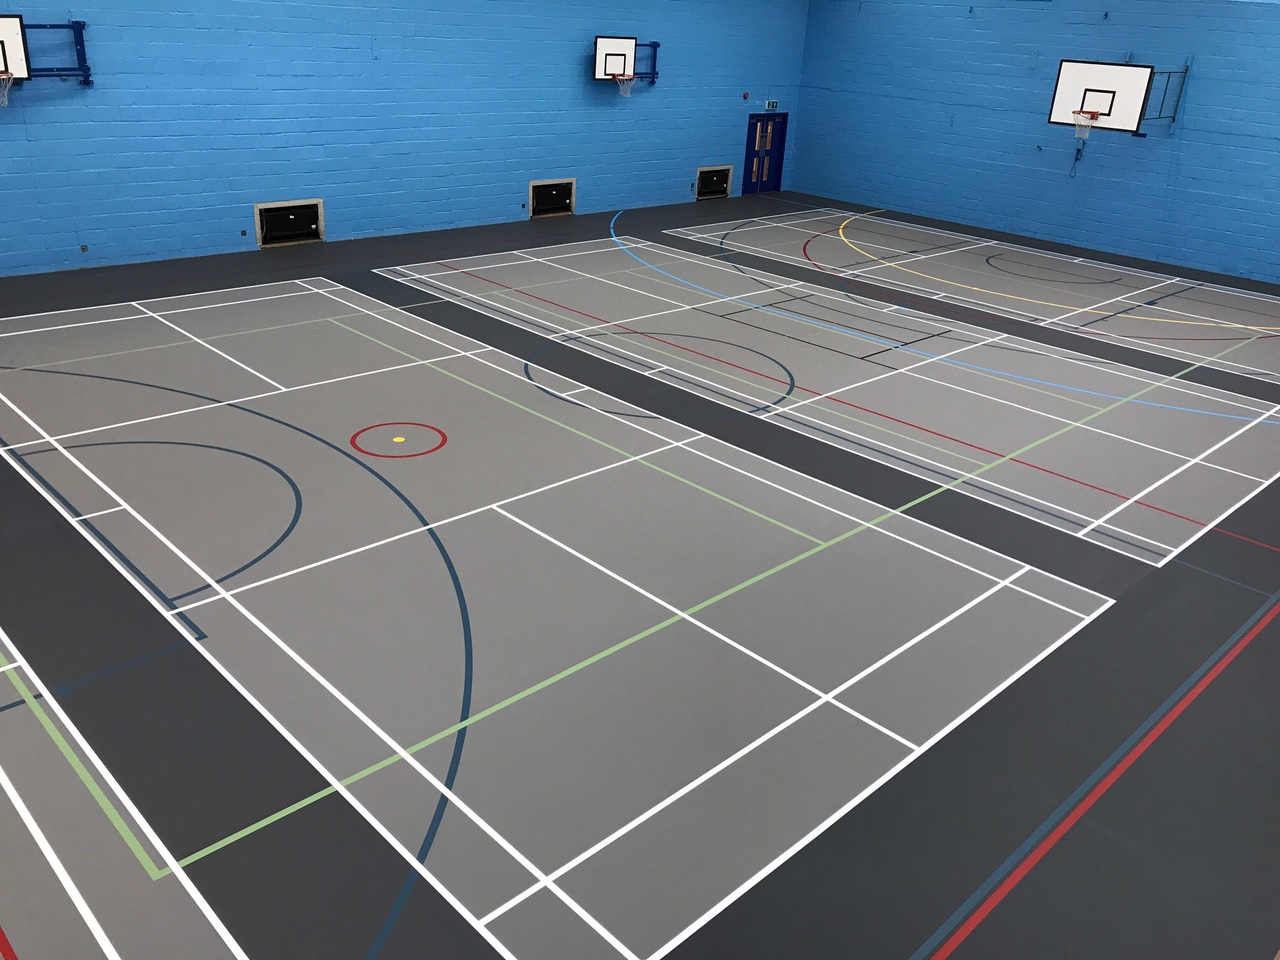 Pulastic multi-use sports floor installation with court markings for indoor Leisure Centre and school Sports halls